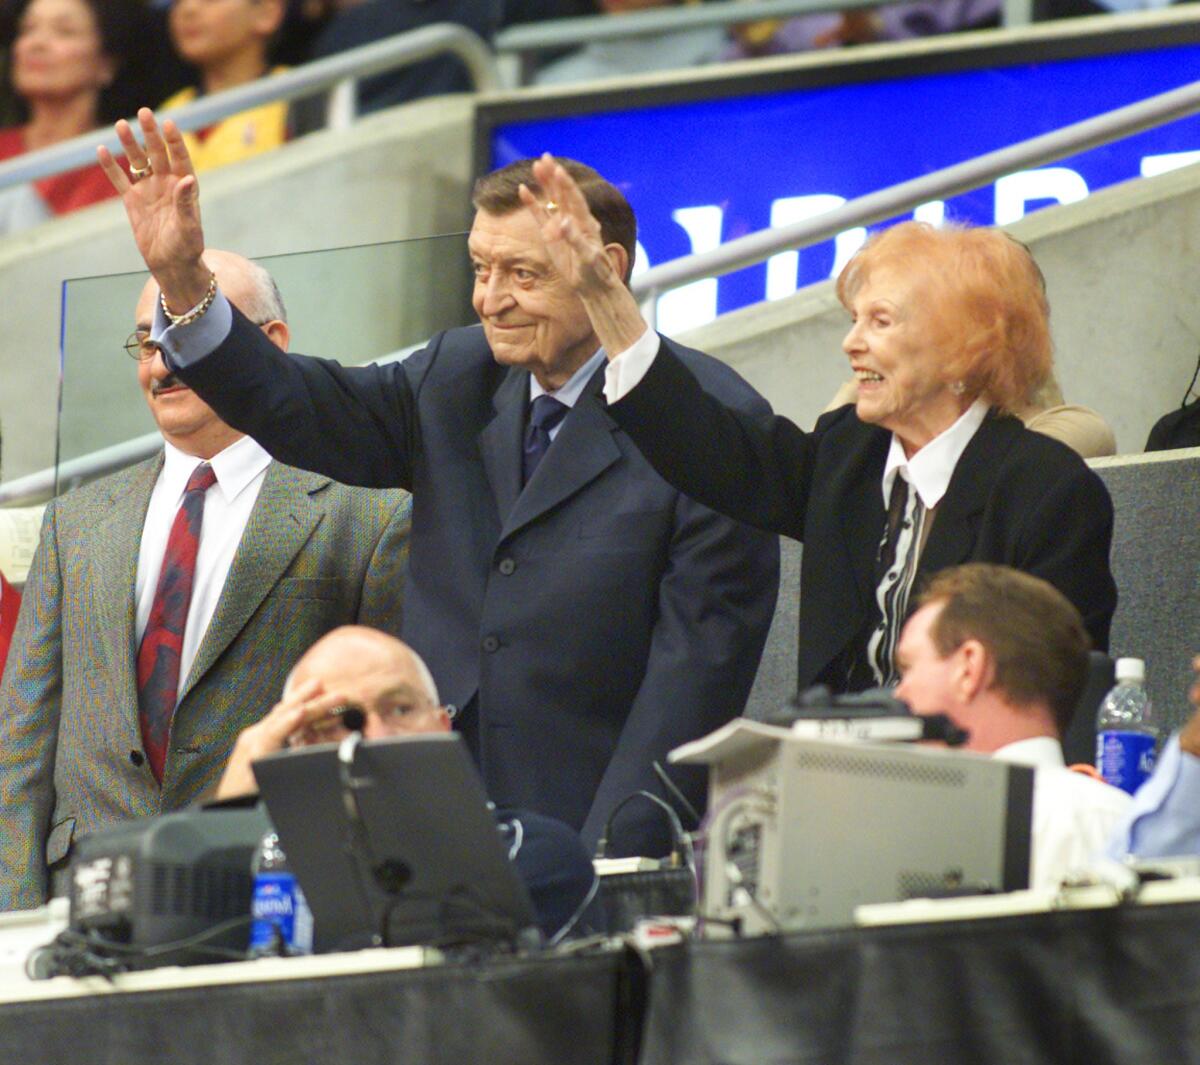 Lakers announcer Chick Hearn and his wife, Marge, at Staples Center in 2002.